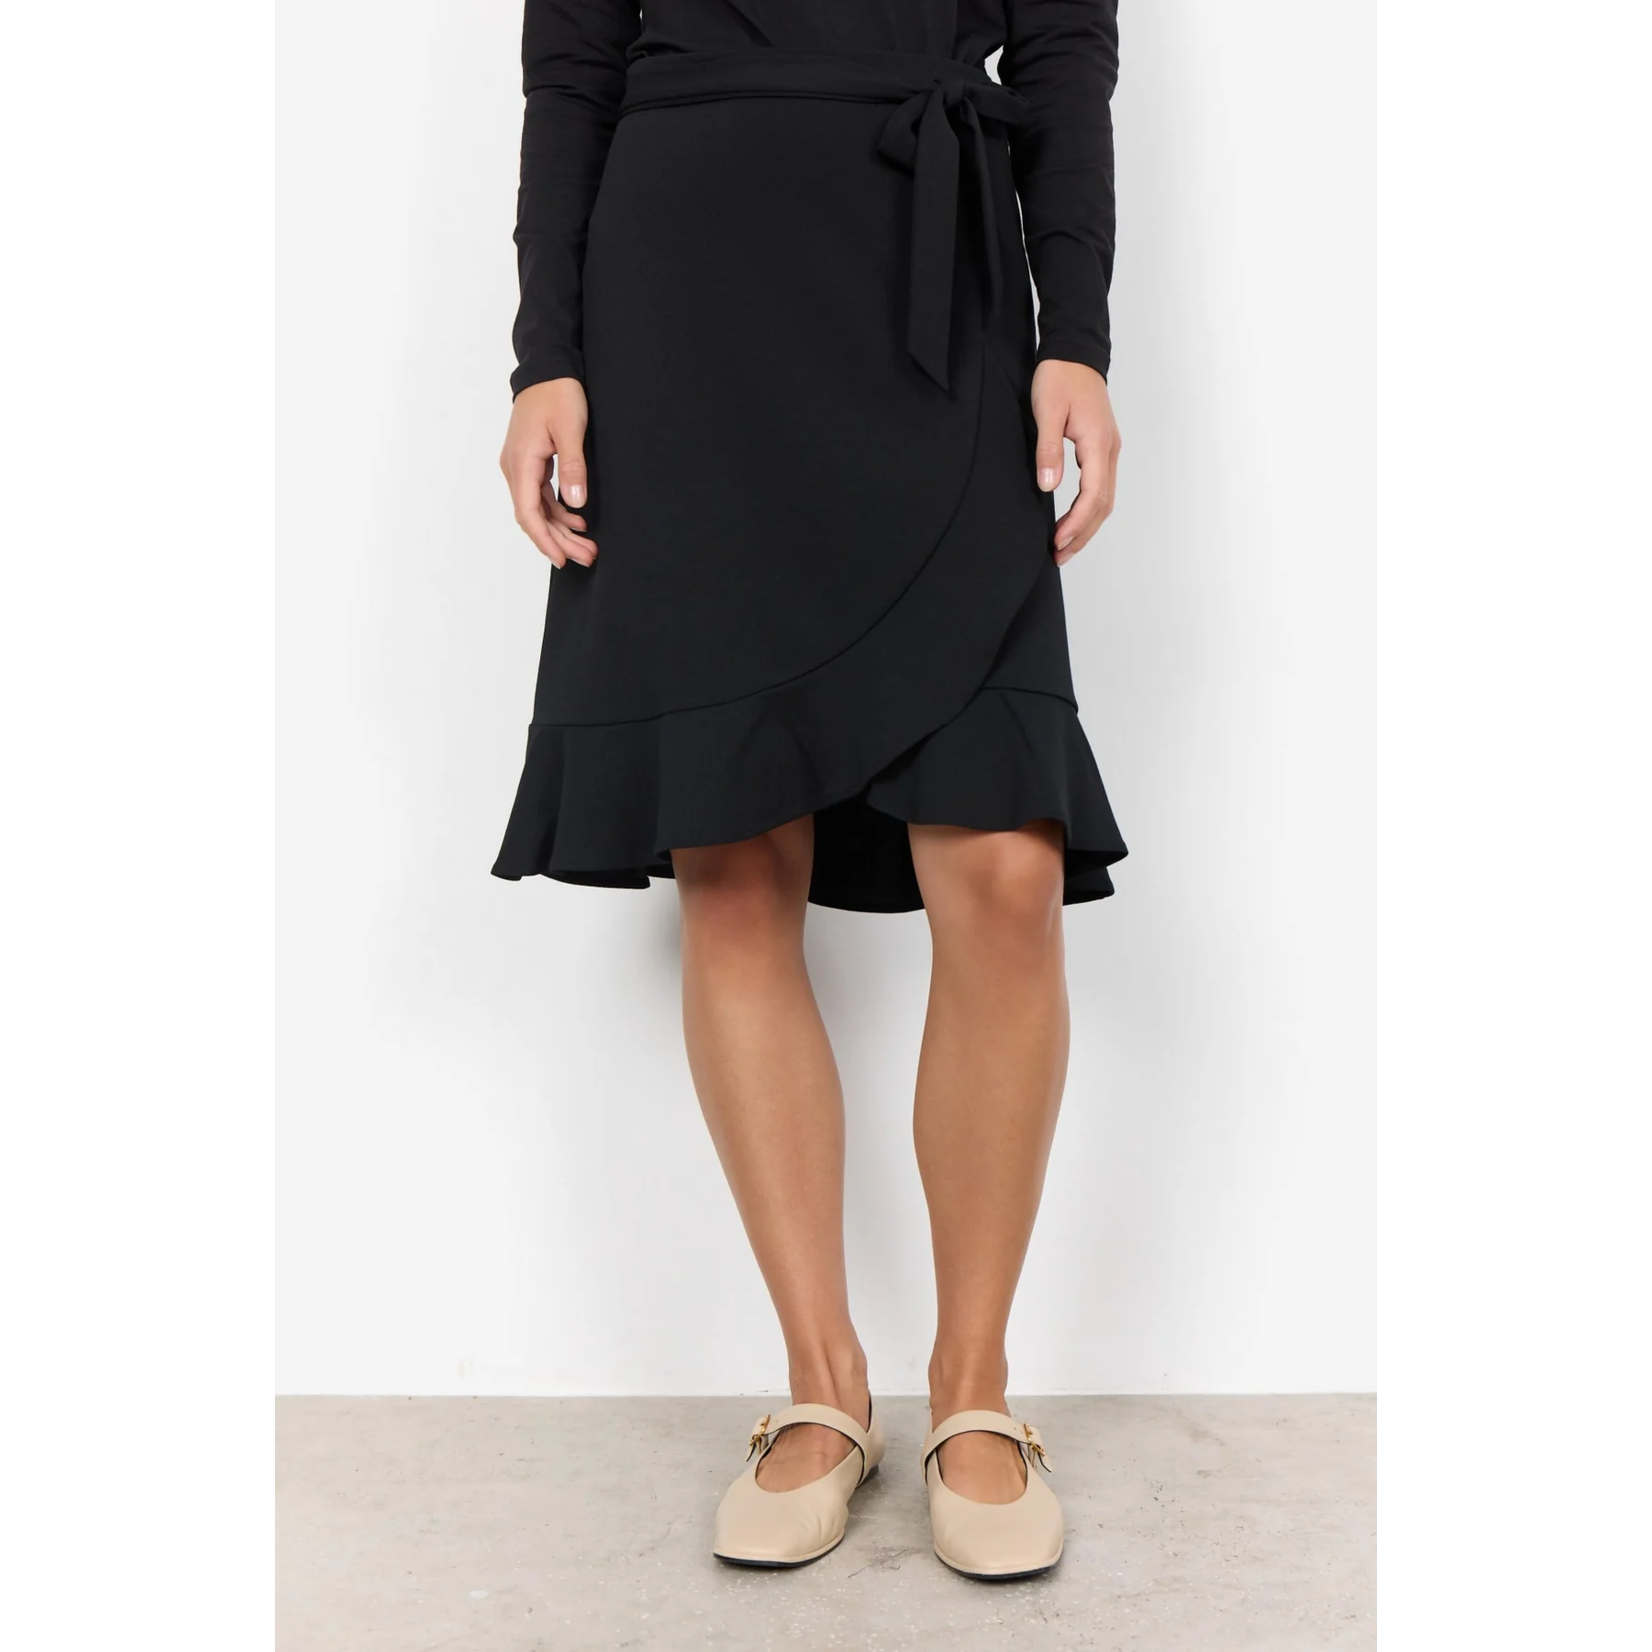 Soya Concept Soya Concept pull on stretch skirt with ruffle front, skirts, dresses